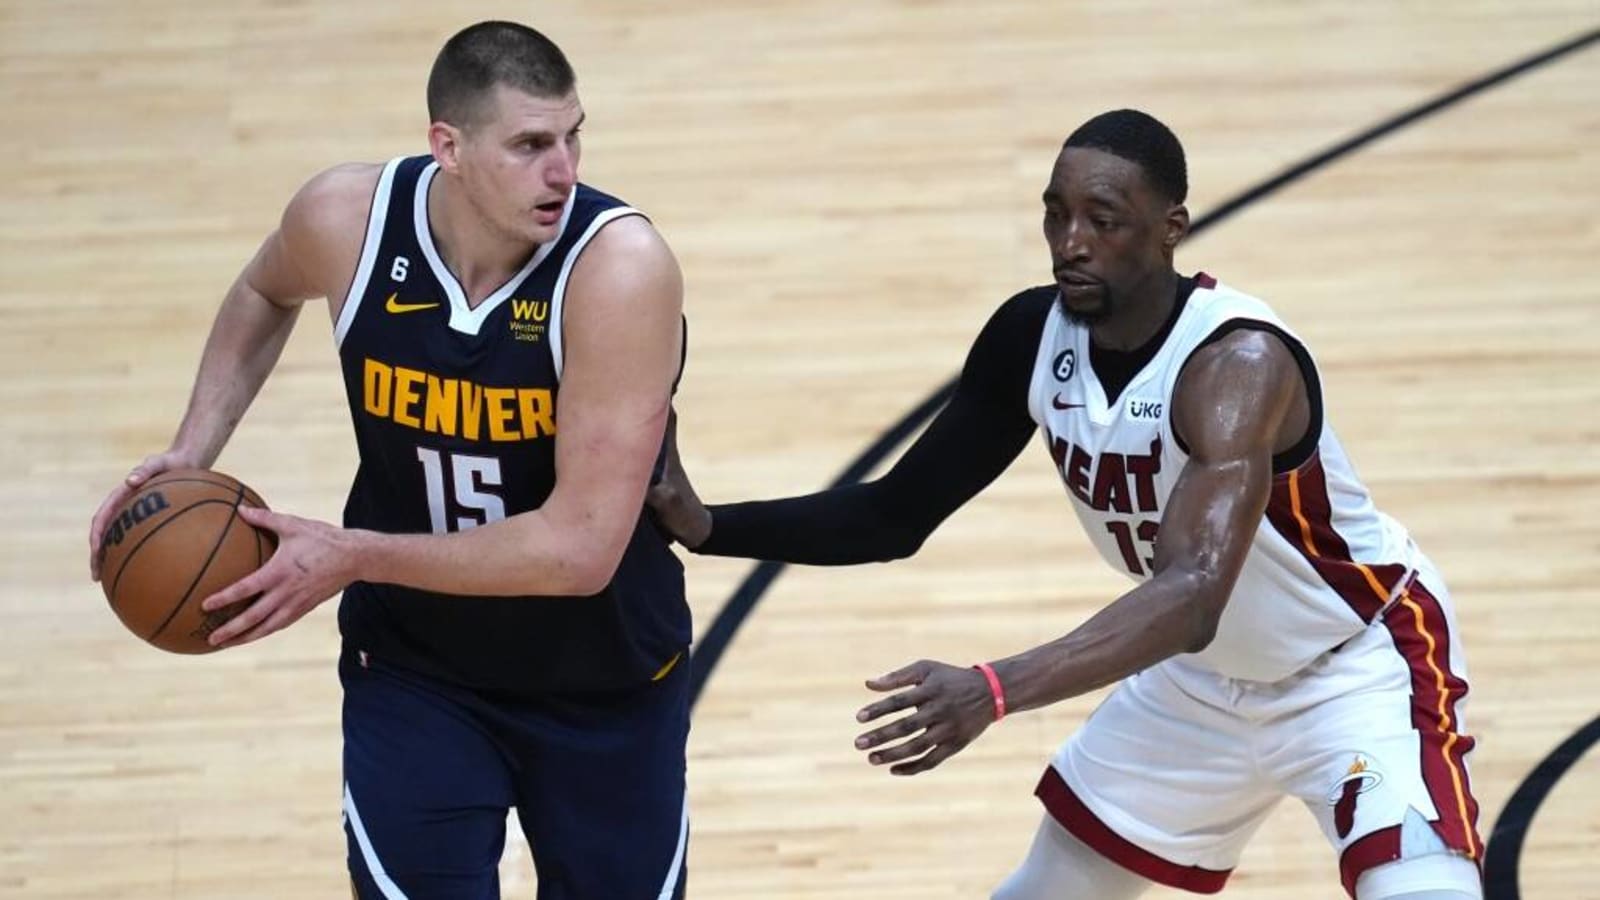 Watch Denver Nuggets vs Miami Heat in Game 5 NBA Finals in free live stream, start time and TV channel Yardbarker